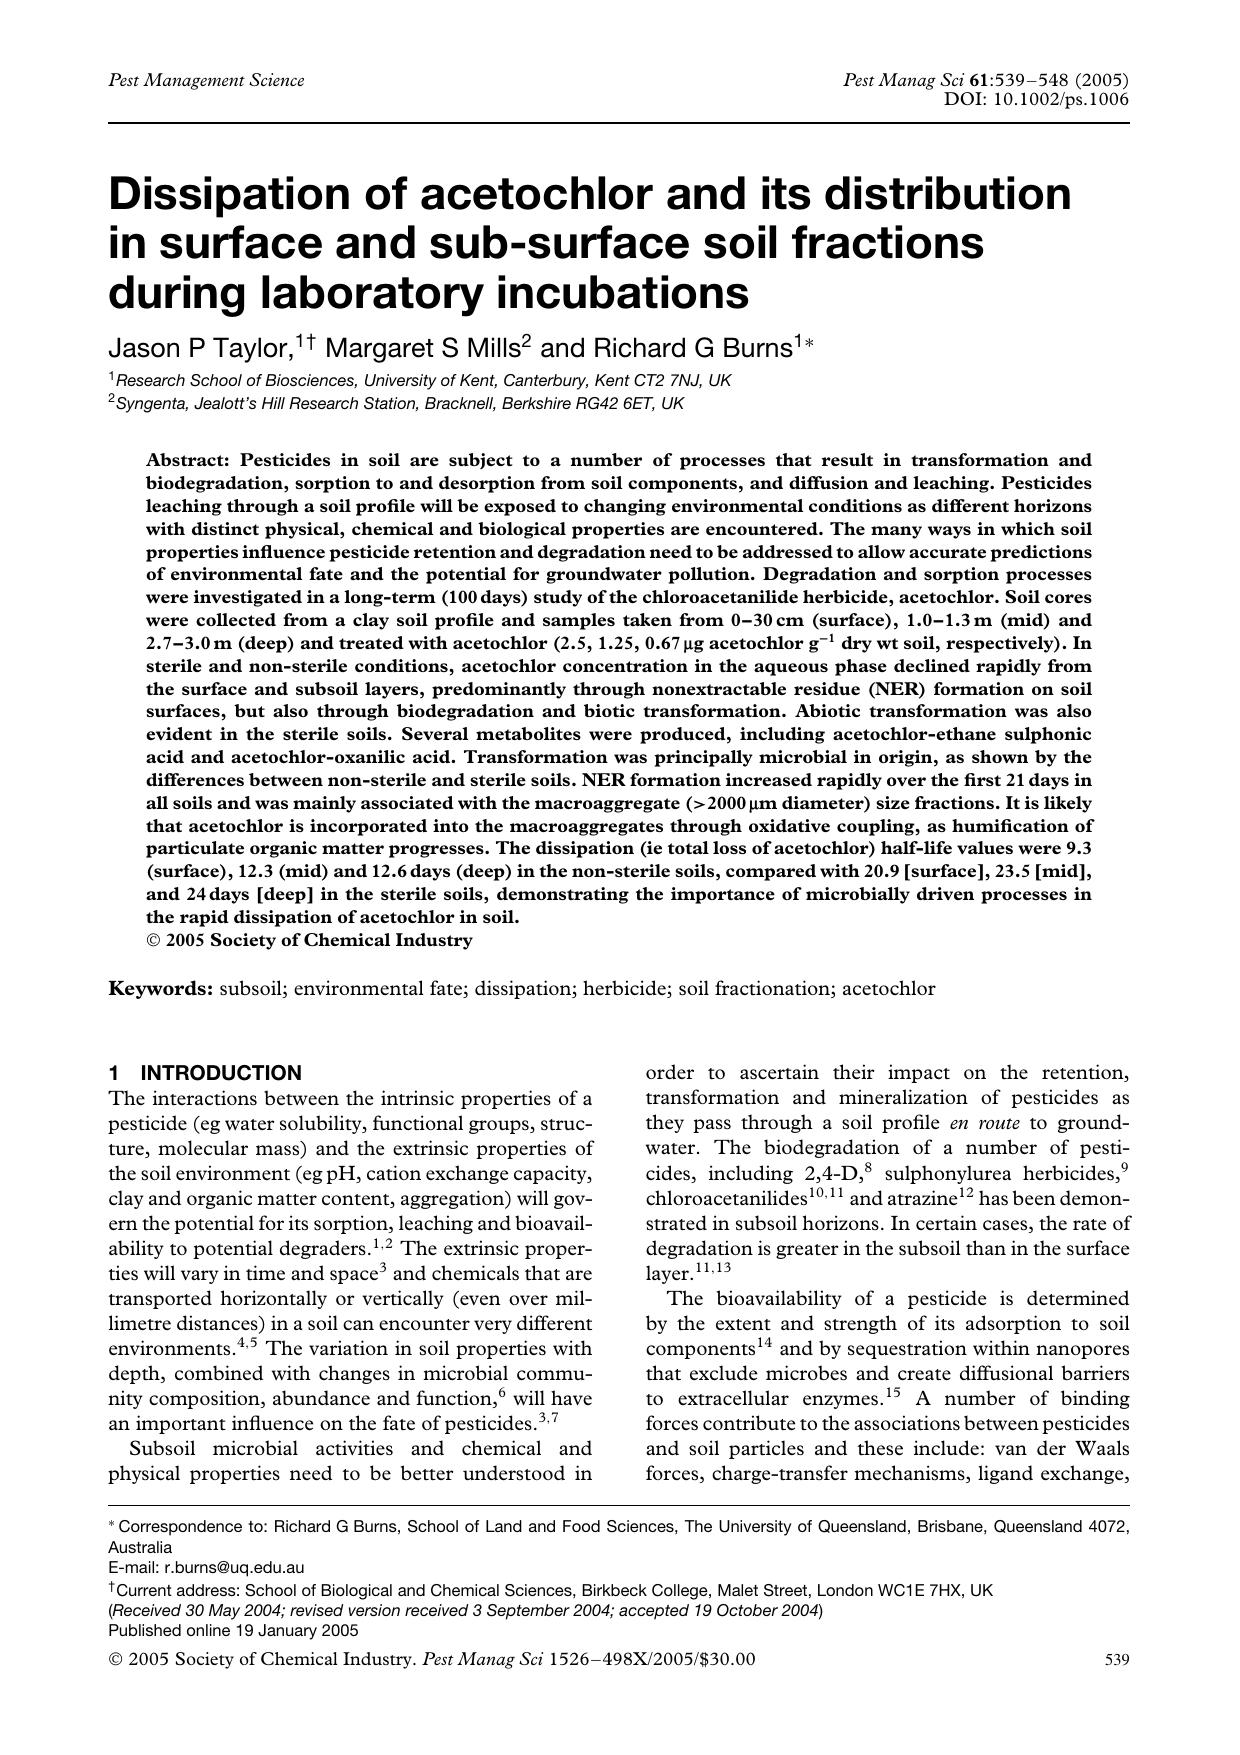 Dissipation of acetochlor and its distribution in surface and sub-surface soil fractions during laboratory incubations by Unknown